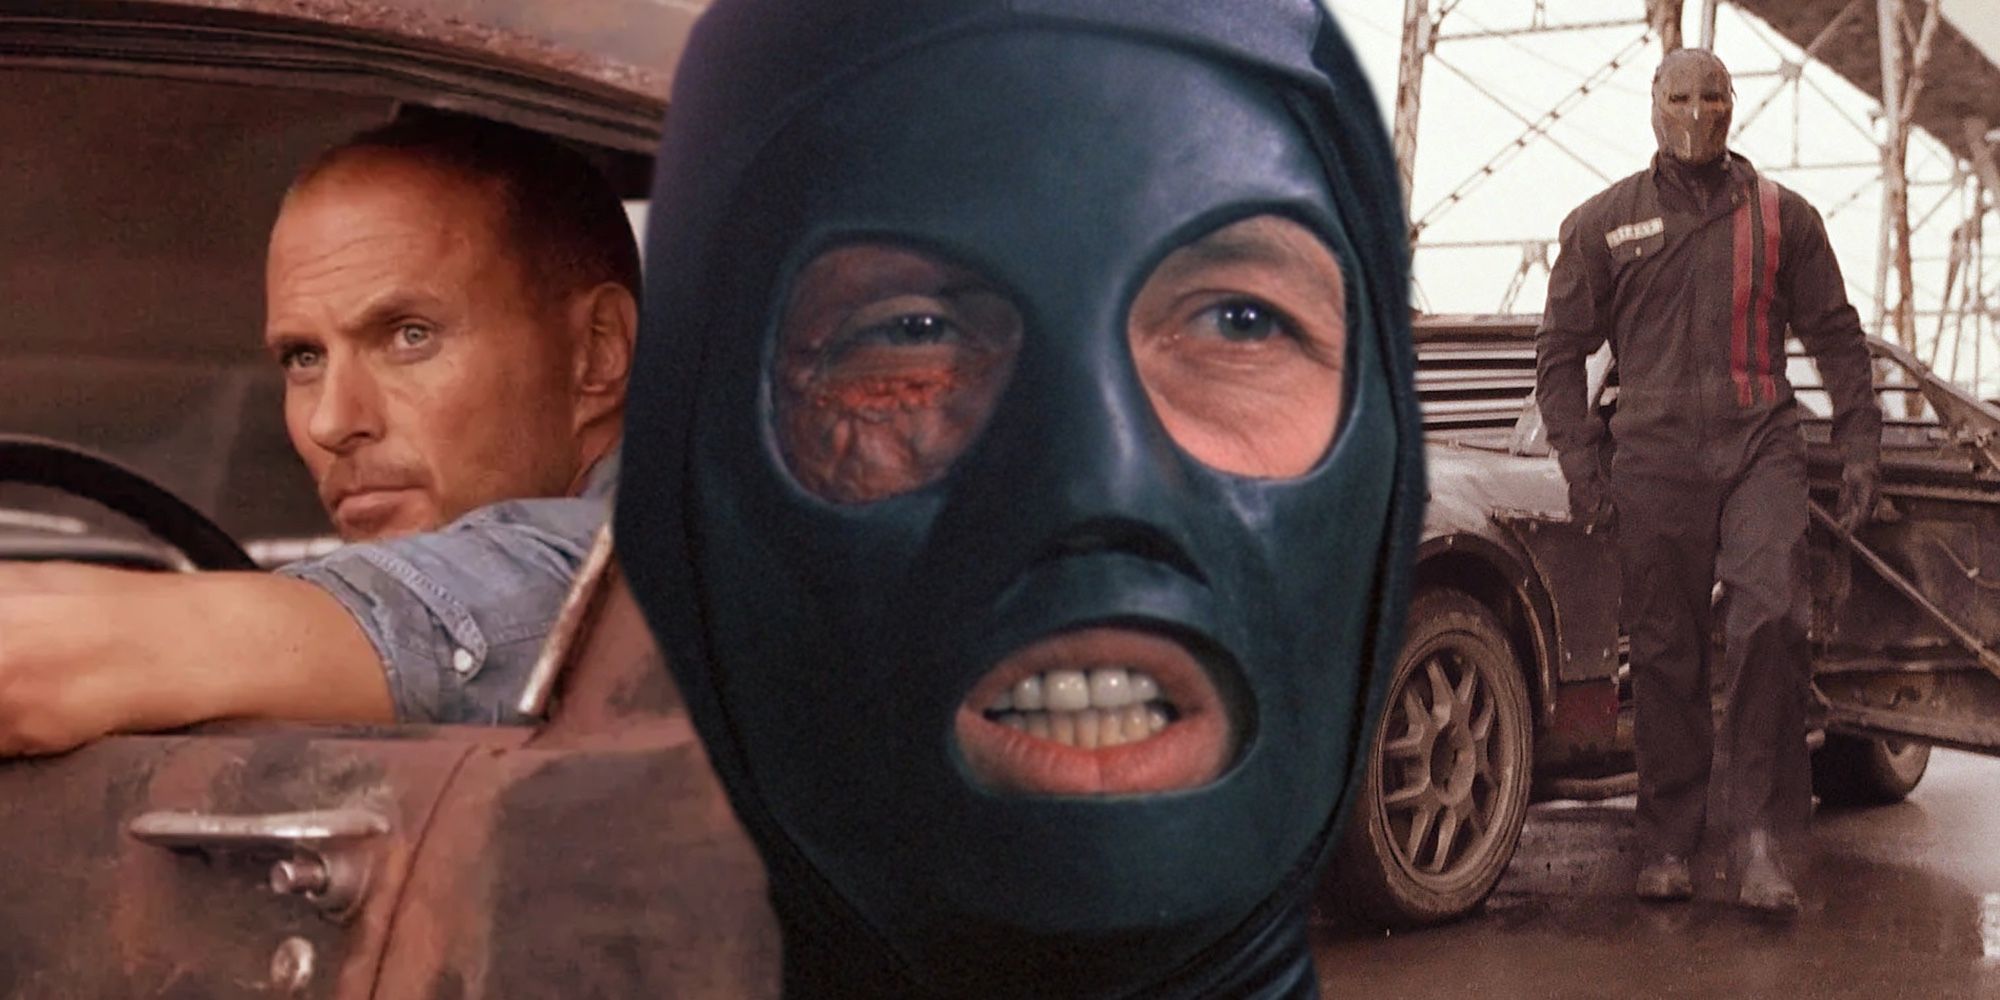 A composite image of stills from the Death Race movies